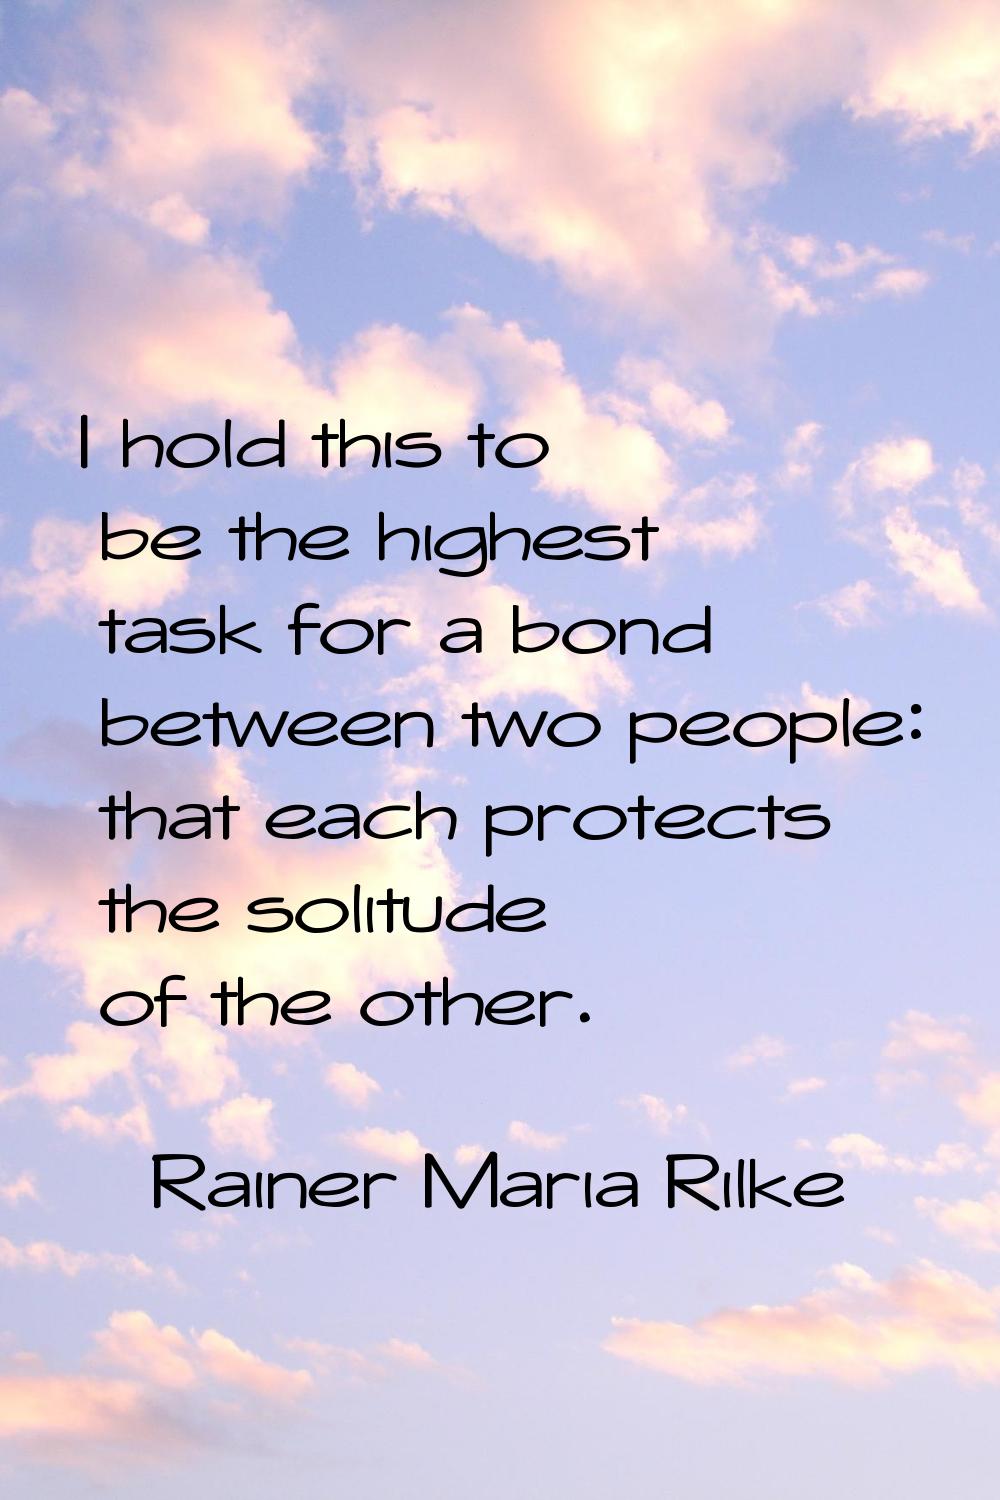 I hold this to be the highest task for a bond between two people: that each protects the solitude o